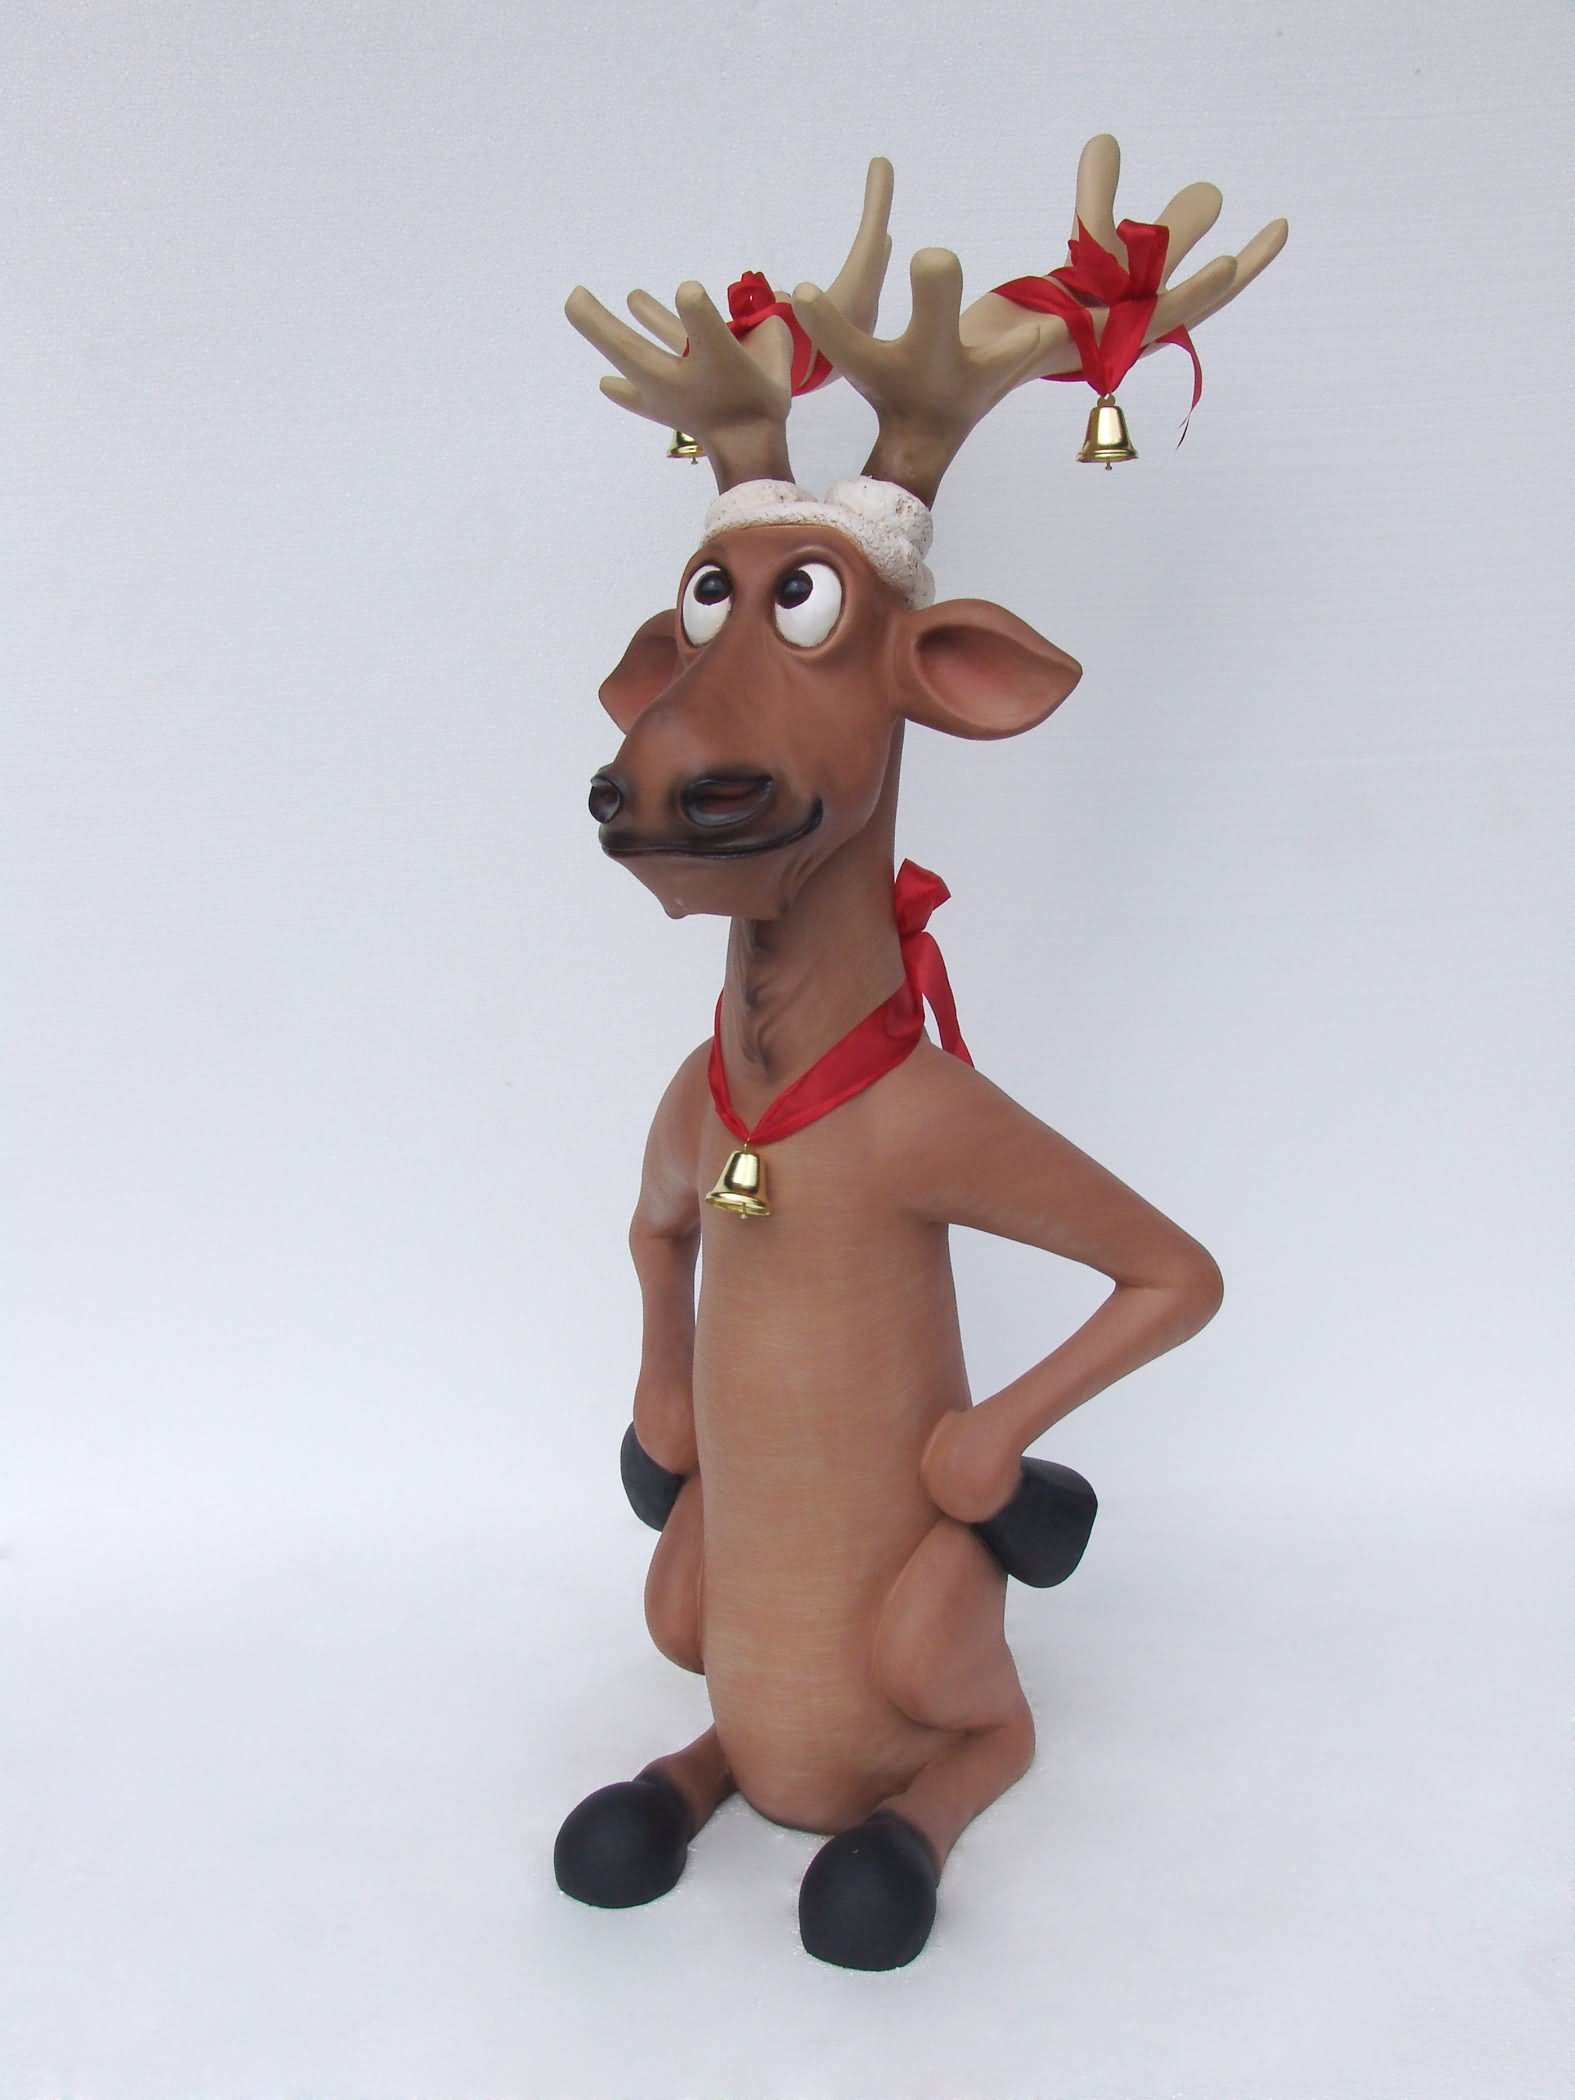 Reindeer With Funny Pose Image